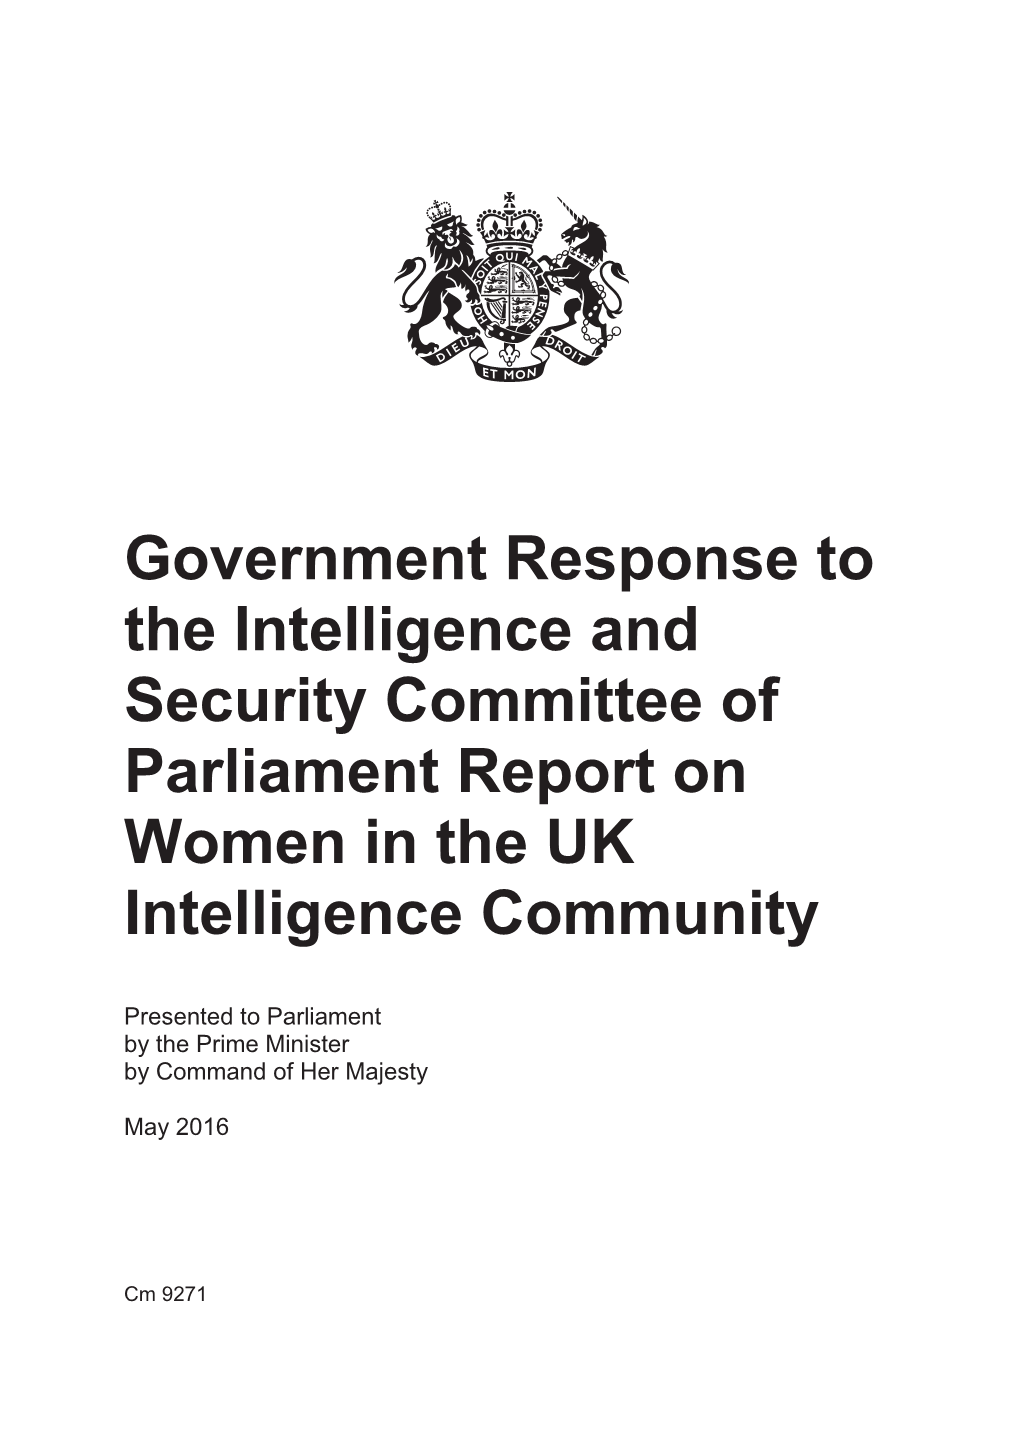 Government Response to the Intelligence and Security Committee of Parliament Report on Women in the UK Intelligence Community